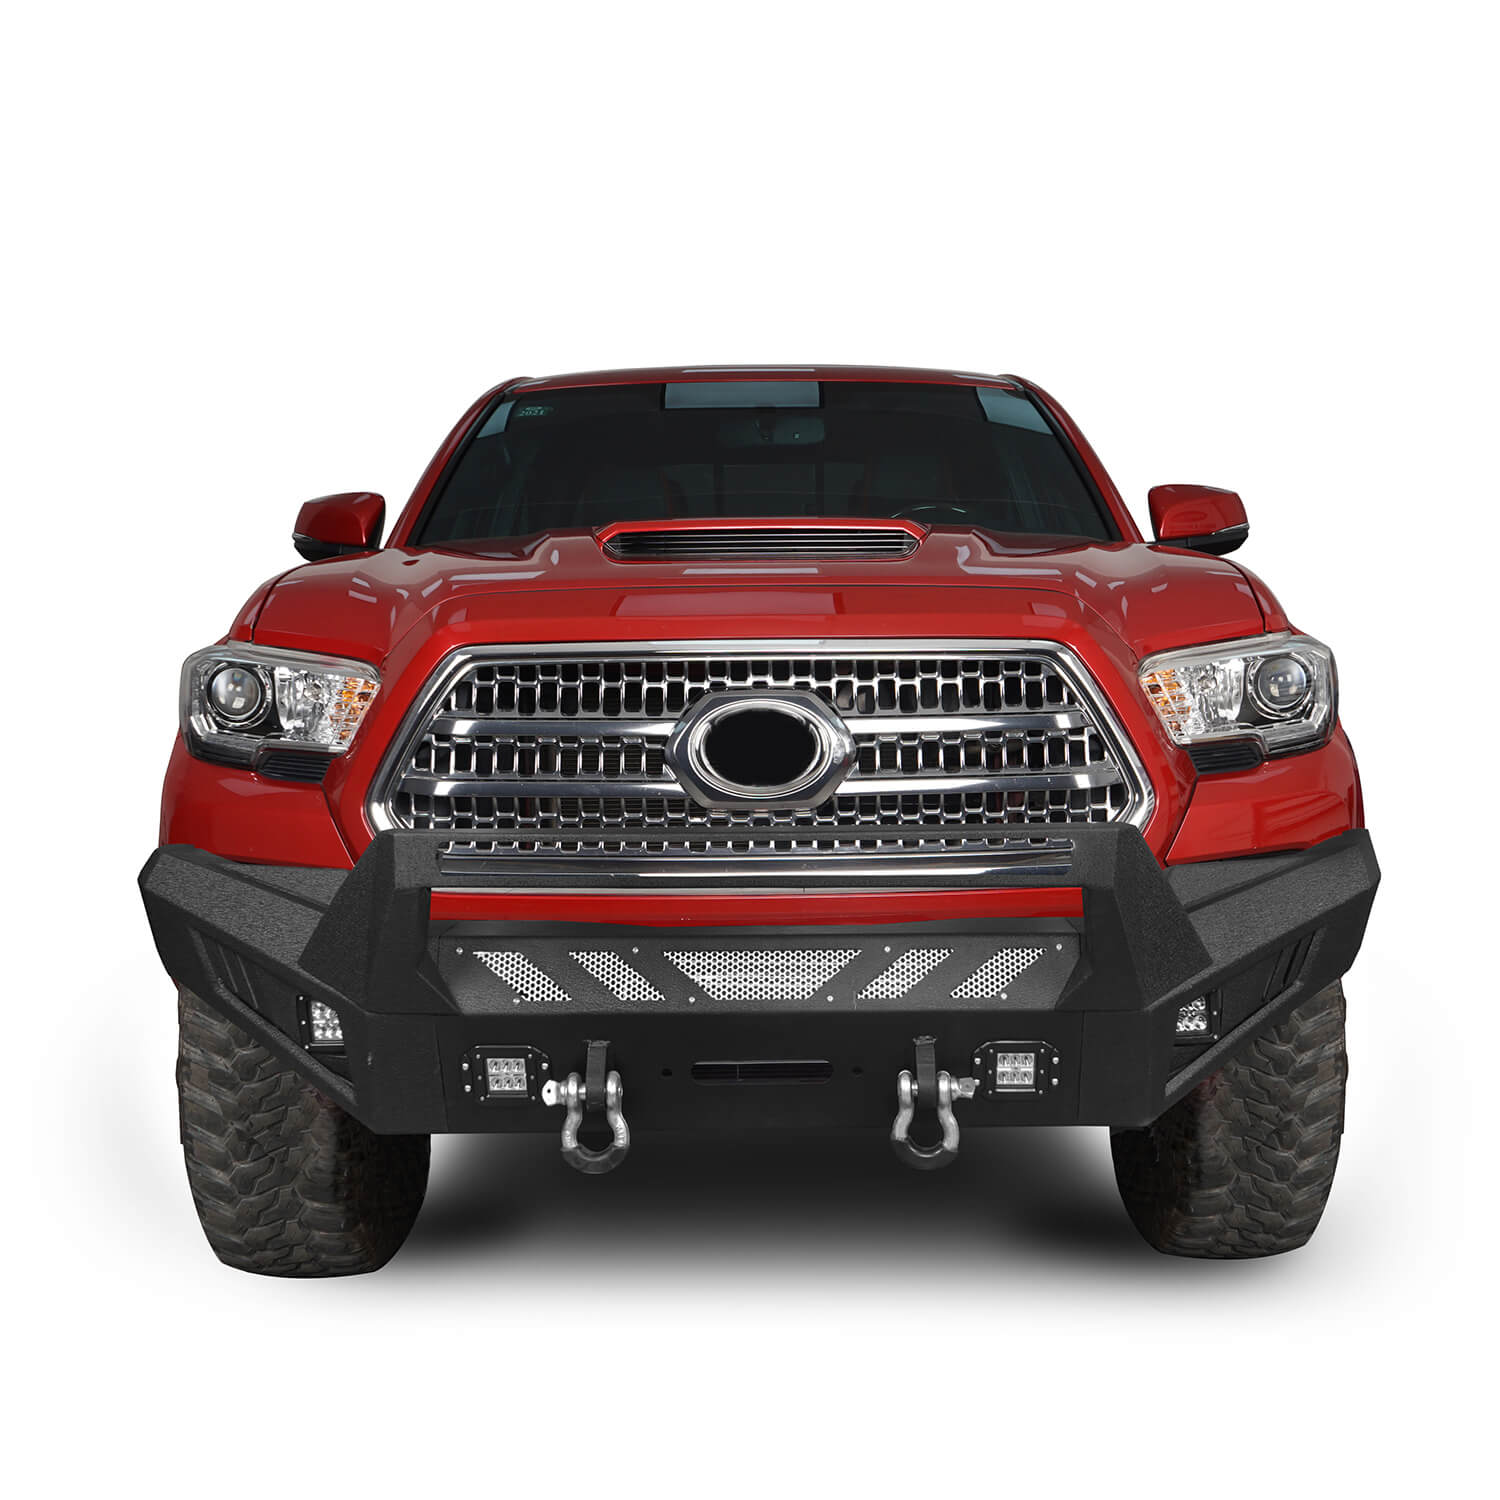 Tacoma Full Width Front Bumper for 2005-2011 Toyota Tacoma b400140084201-13